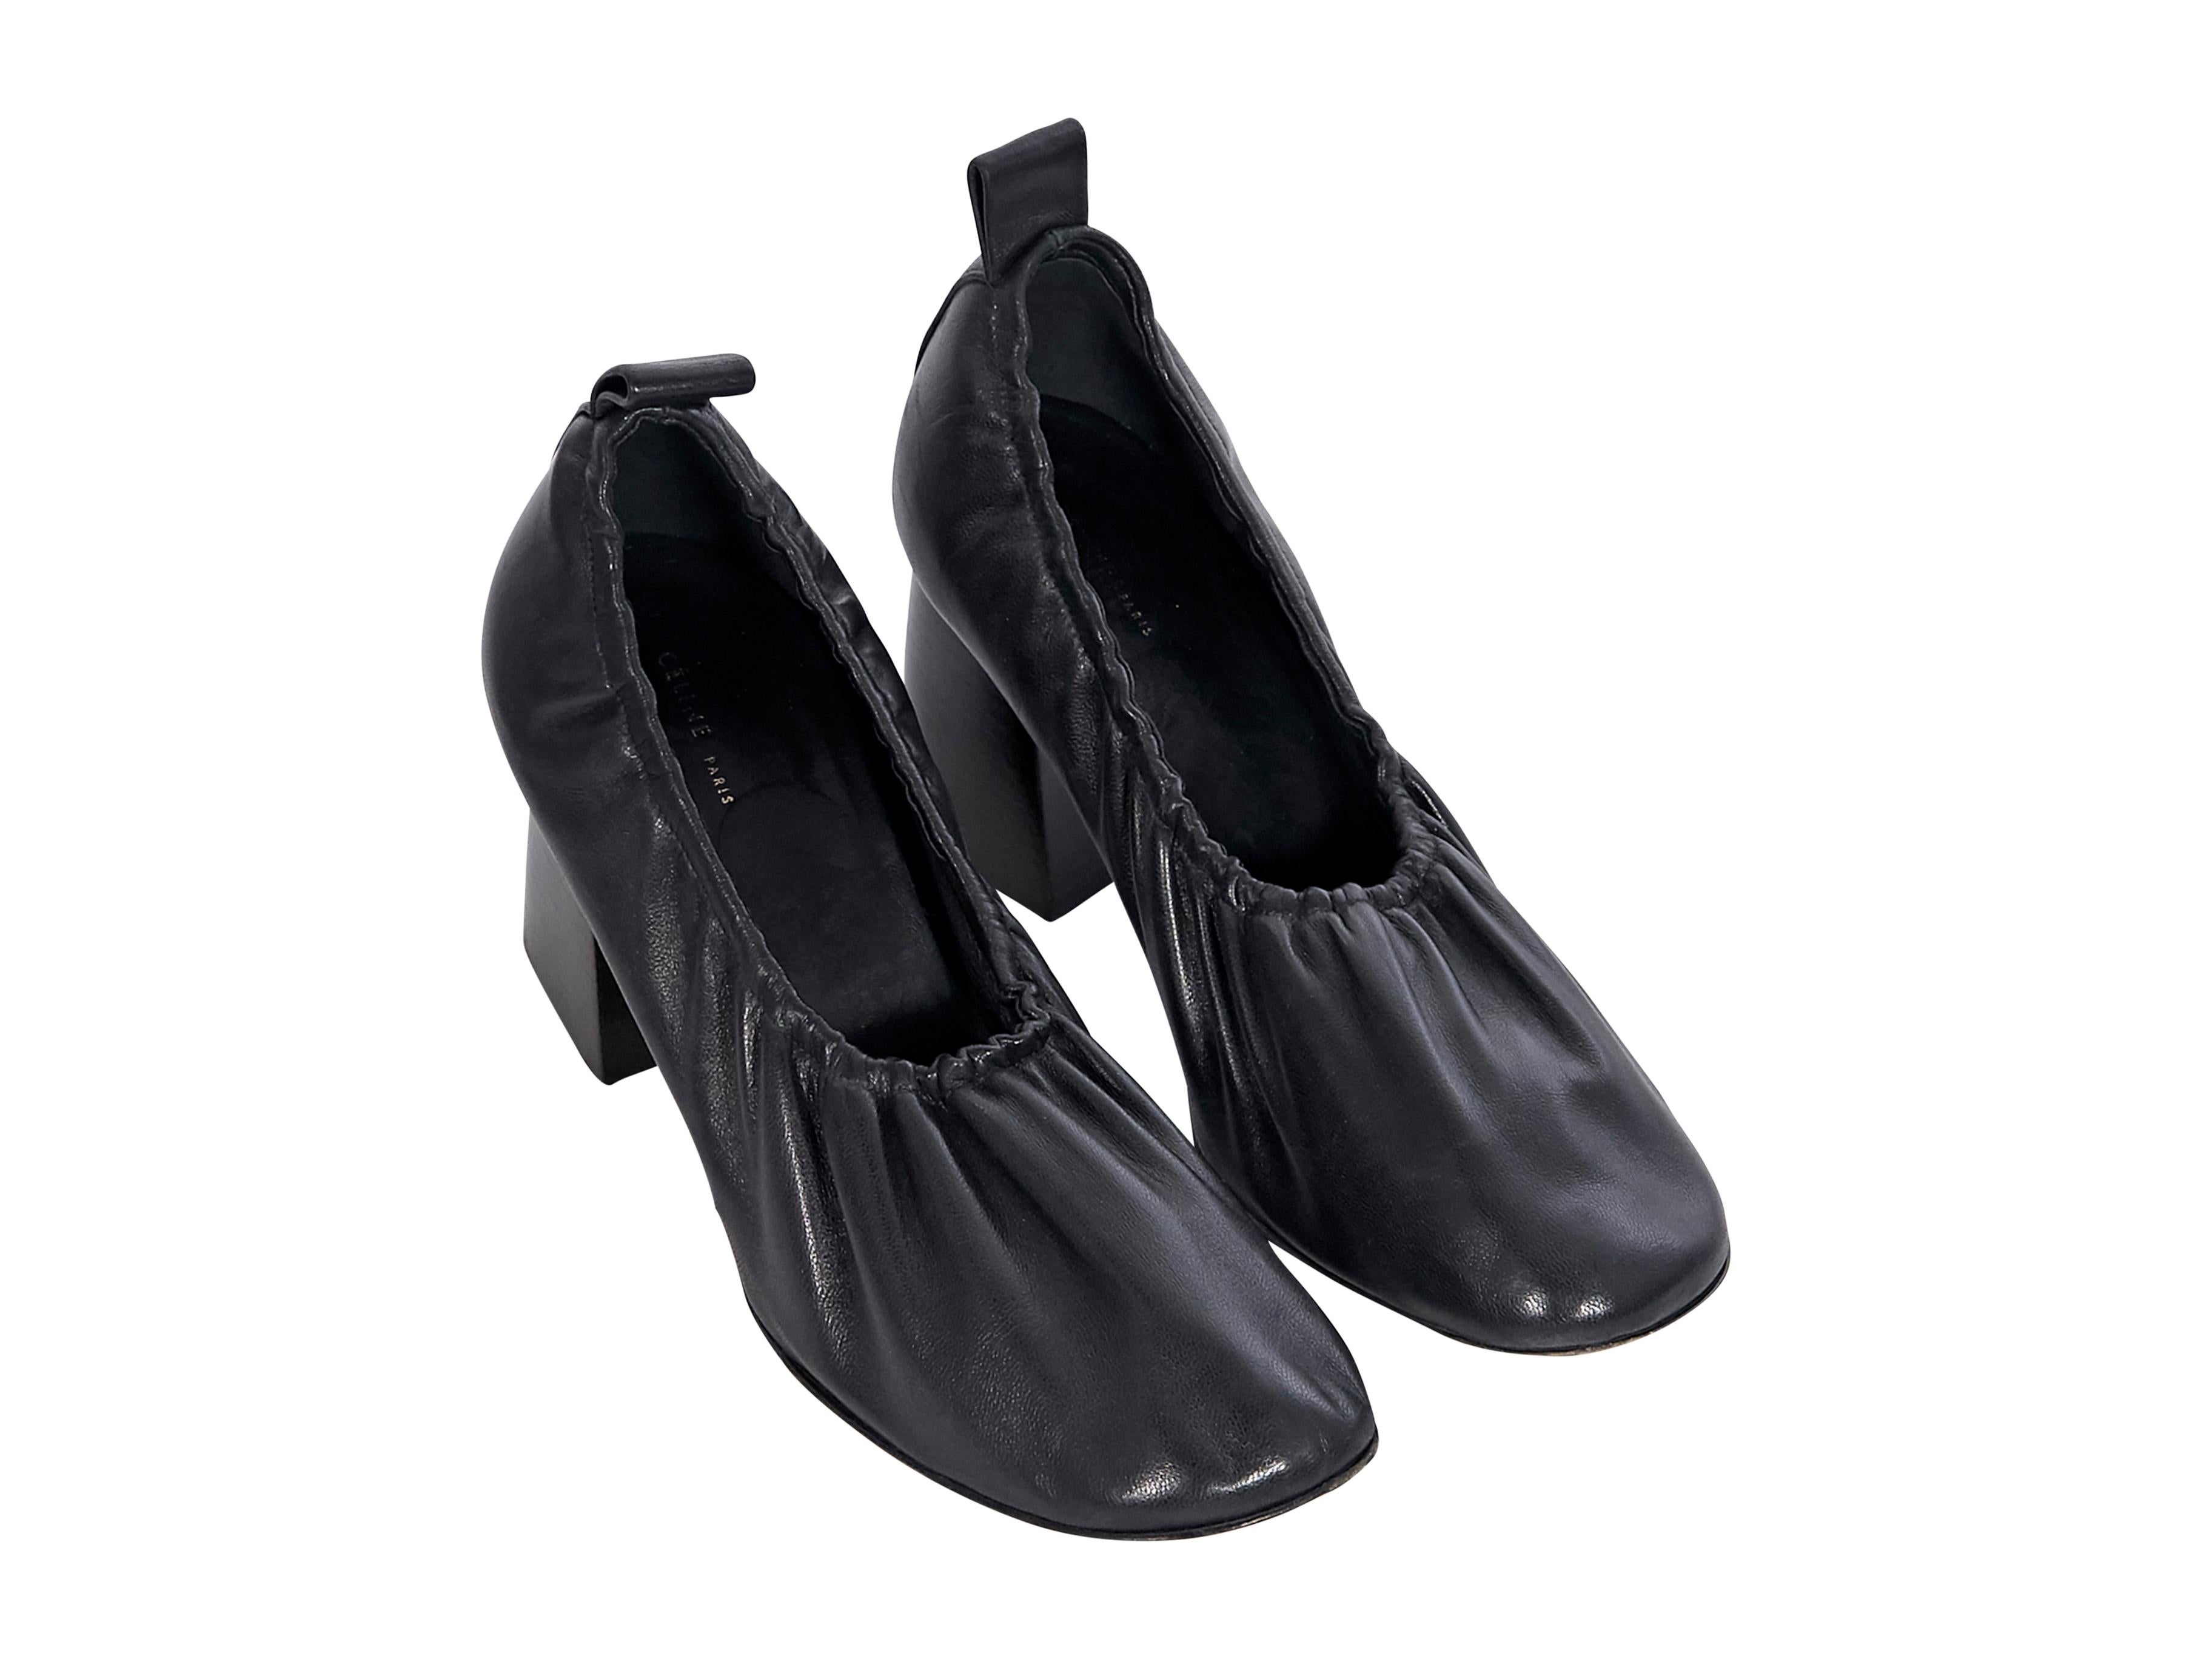 Product details:  Black leather ballerina-style pumps by Celine. Square-toe.  Stacked heel. Slip-on style. Style yours with a patterned pencil skirt. Label size FR 39. 3